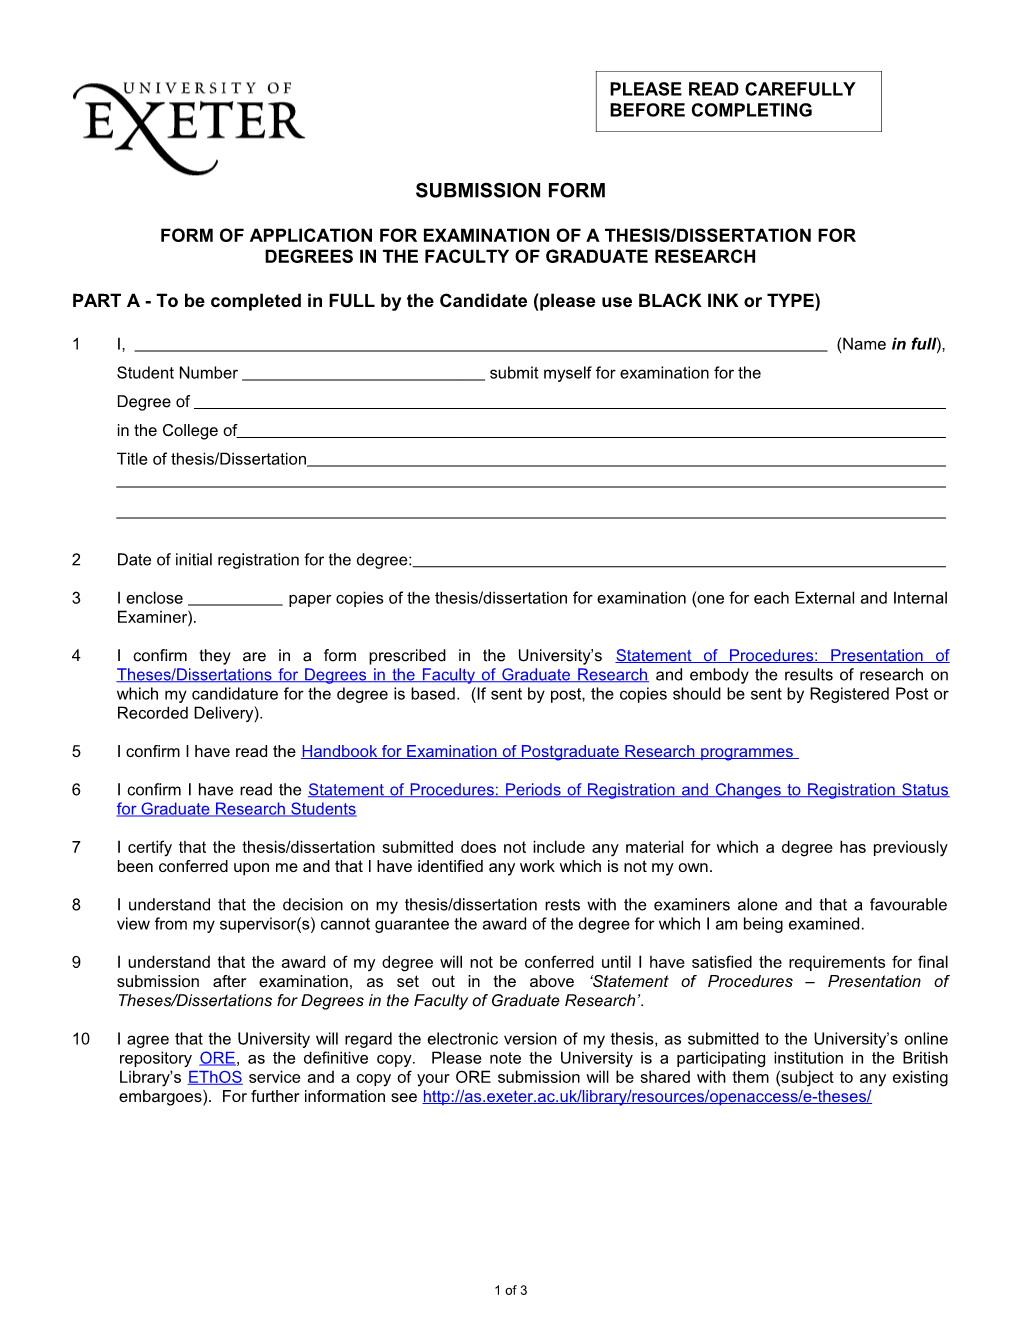 Form of Application for Examination of a Thesis For